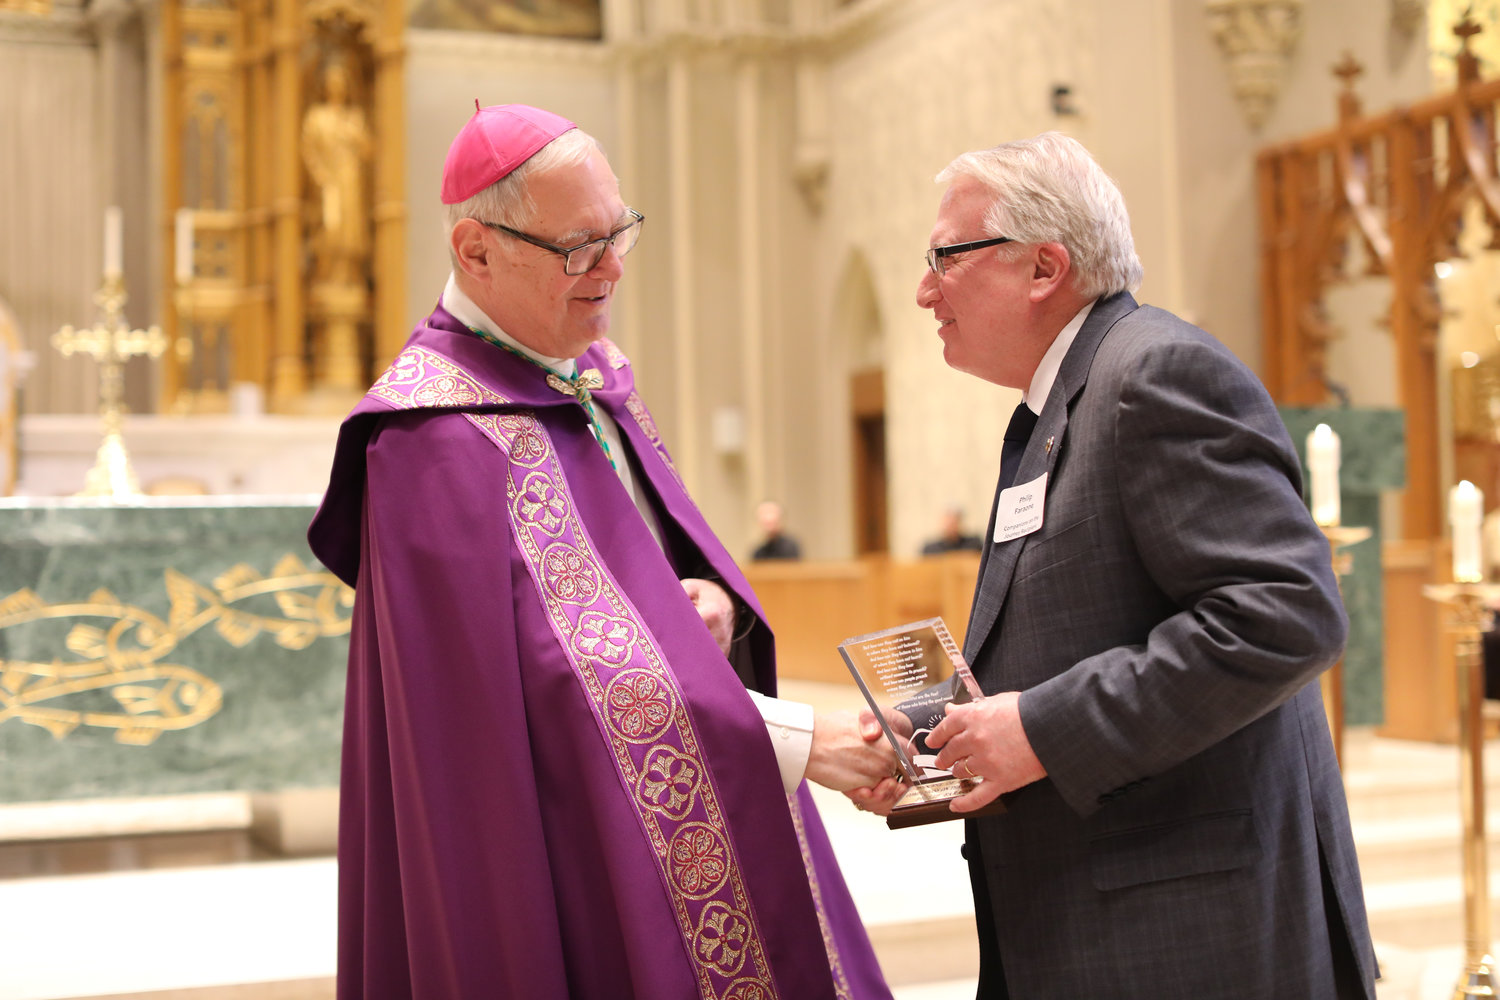 Many were honored at this year’s diocesan Catholic Youth Ministry and Scout Awards, held at the Cathedral of SS. Peter and Paul on Sunday, March 5.